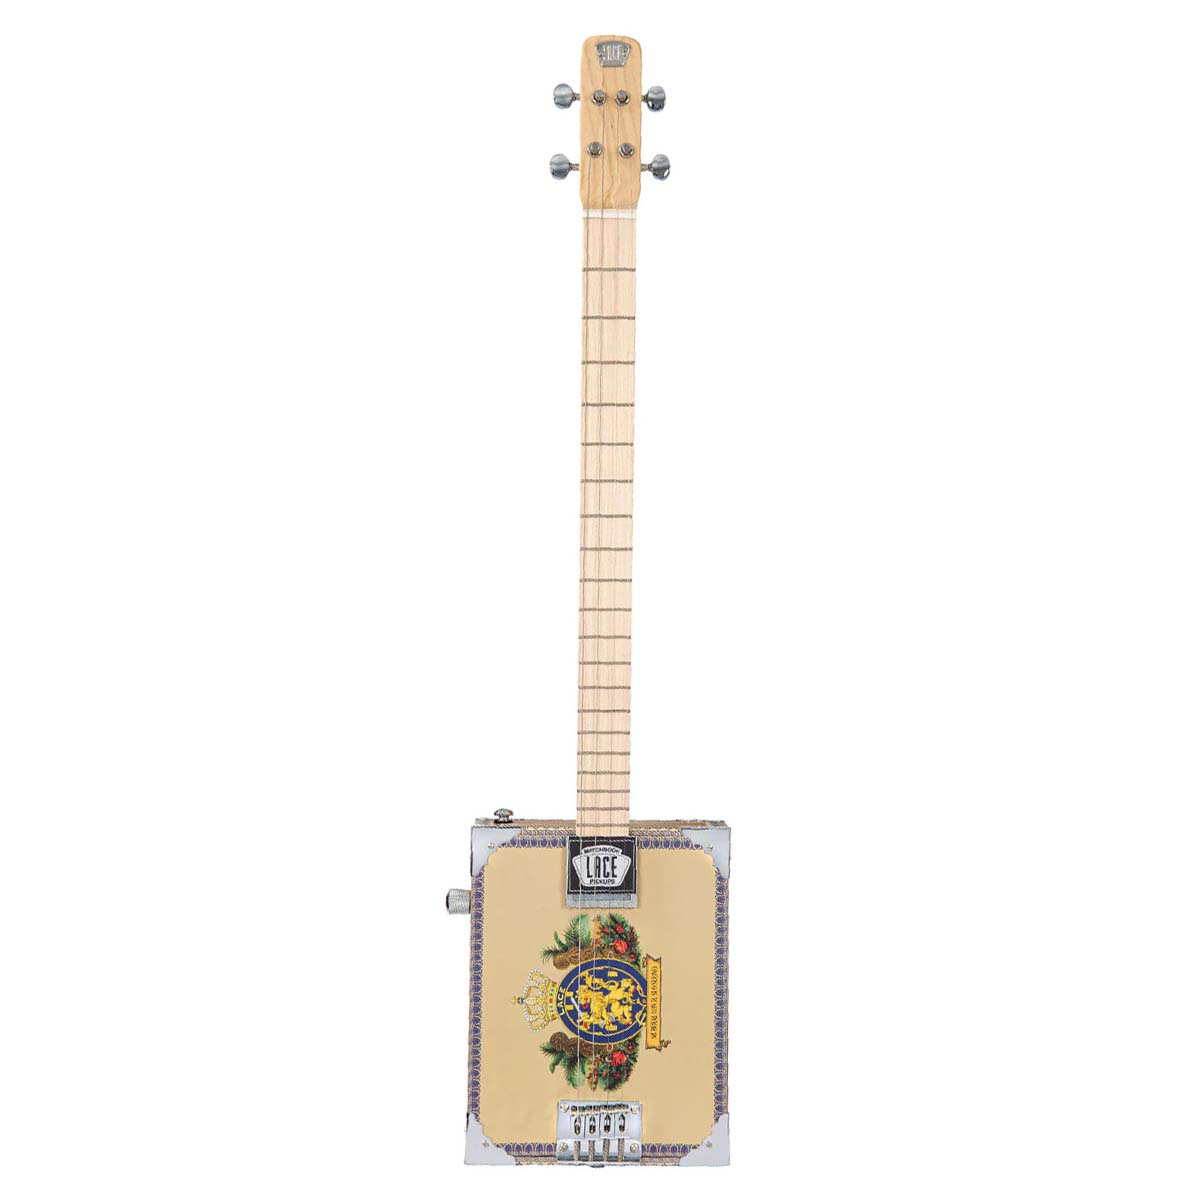 An image of Lace Electric Cigar Box Guitar, Royalty, 4 String